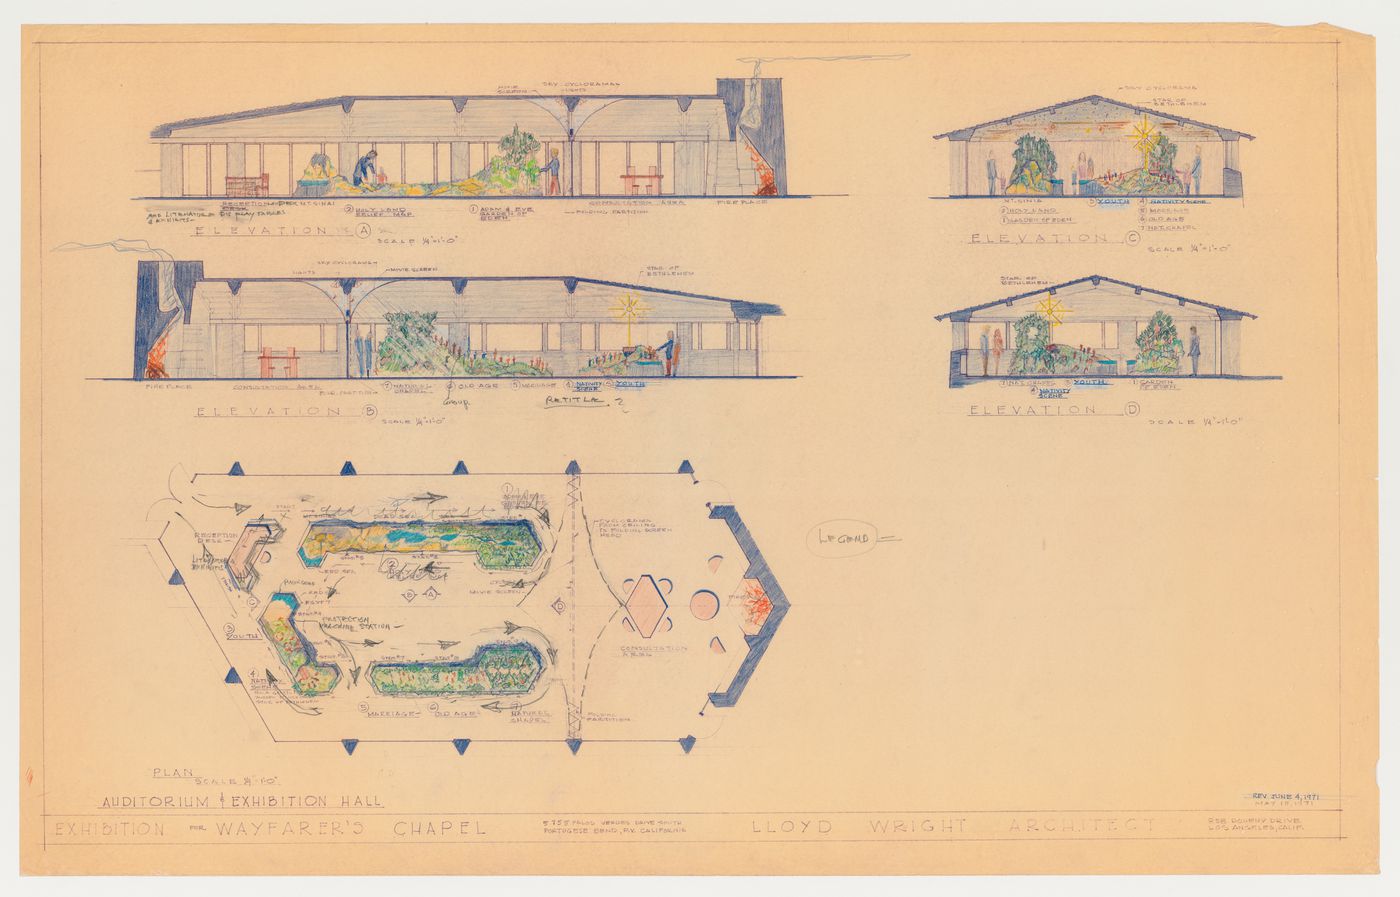 Wayfarers' Chapel, Palos Verdes, California: Plan, two longitudinal and two cross sections for the auditorium audiovisual exhibition